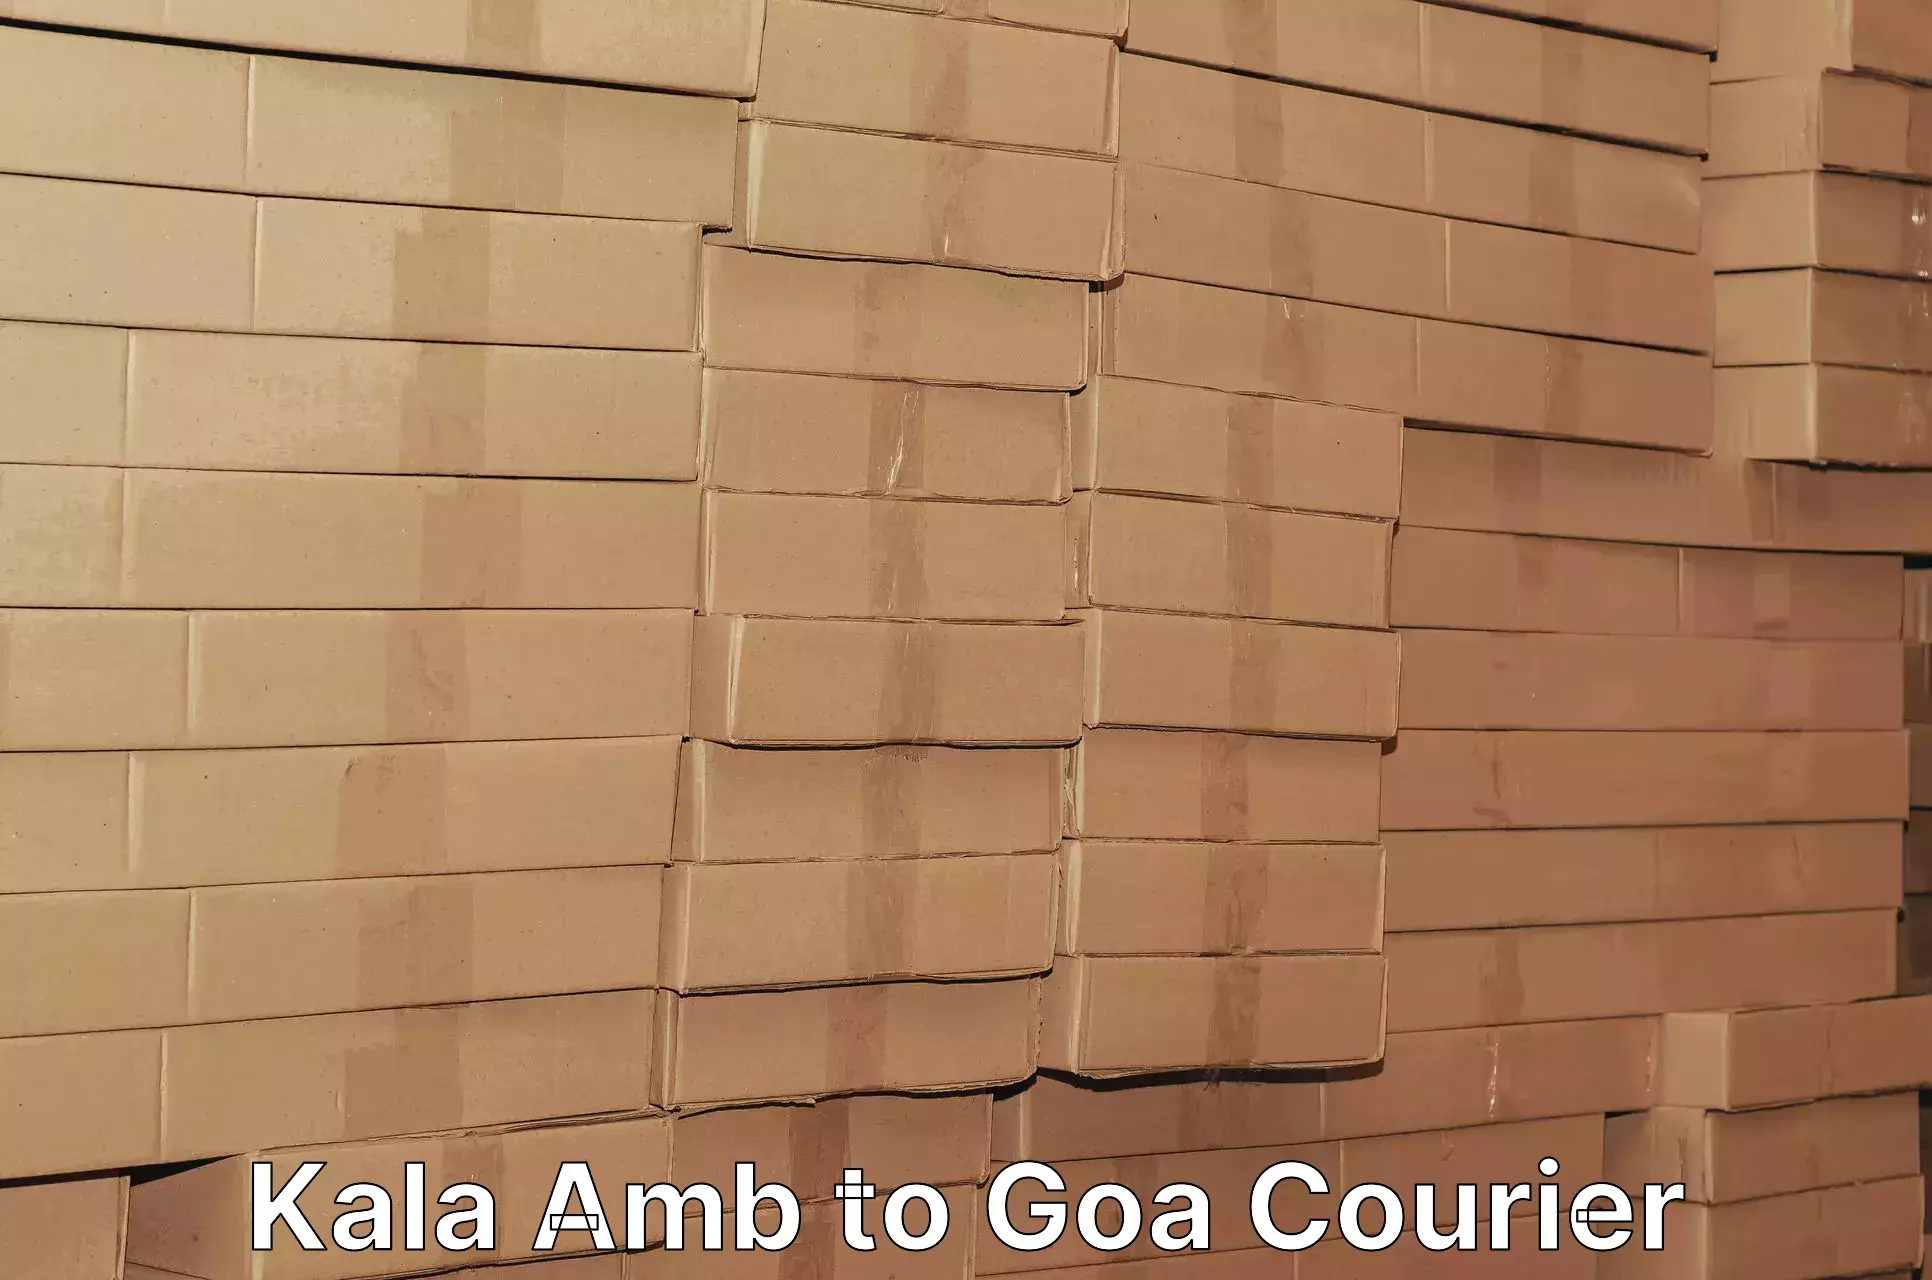 Weekend courier service in Kala Amb to Goa